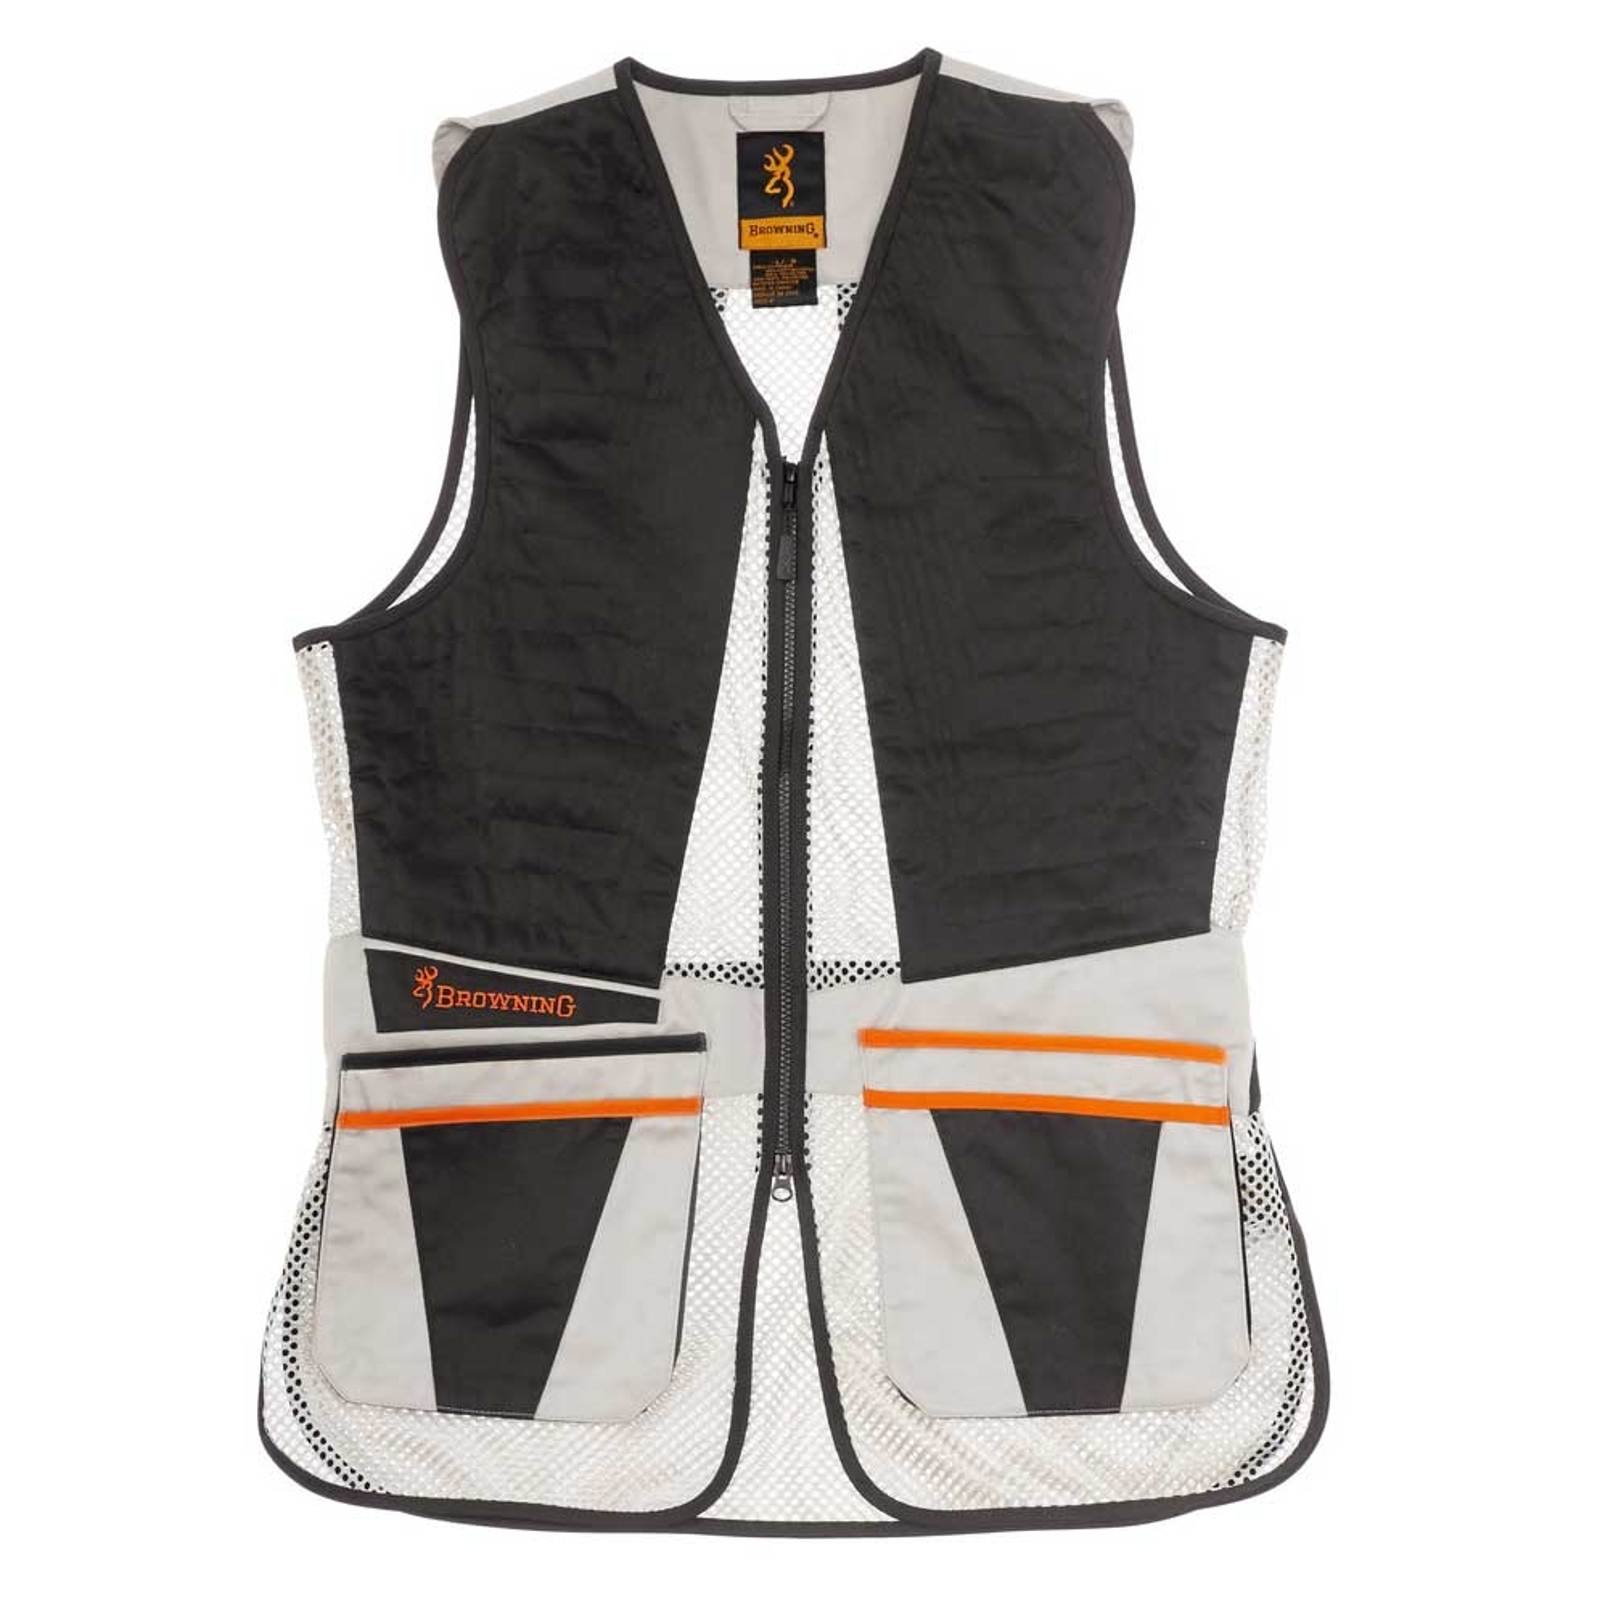 Shooting vests with recoil padding investing amplifier gain derivational suffixes